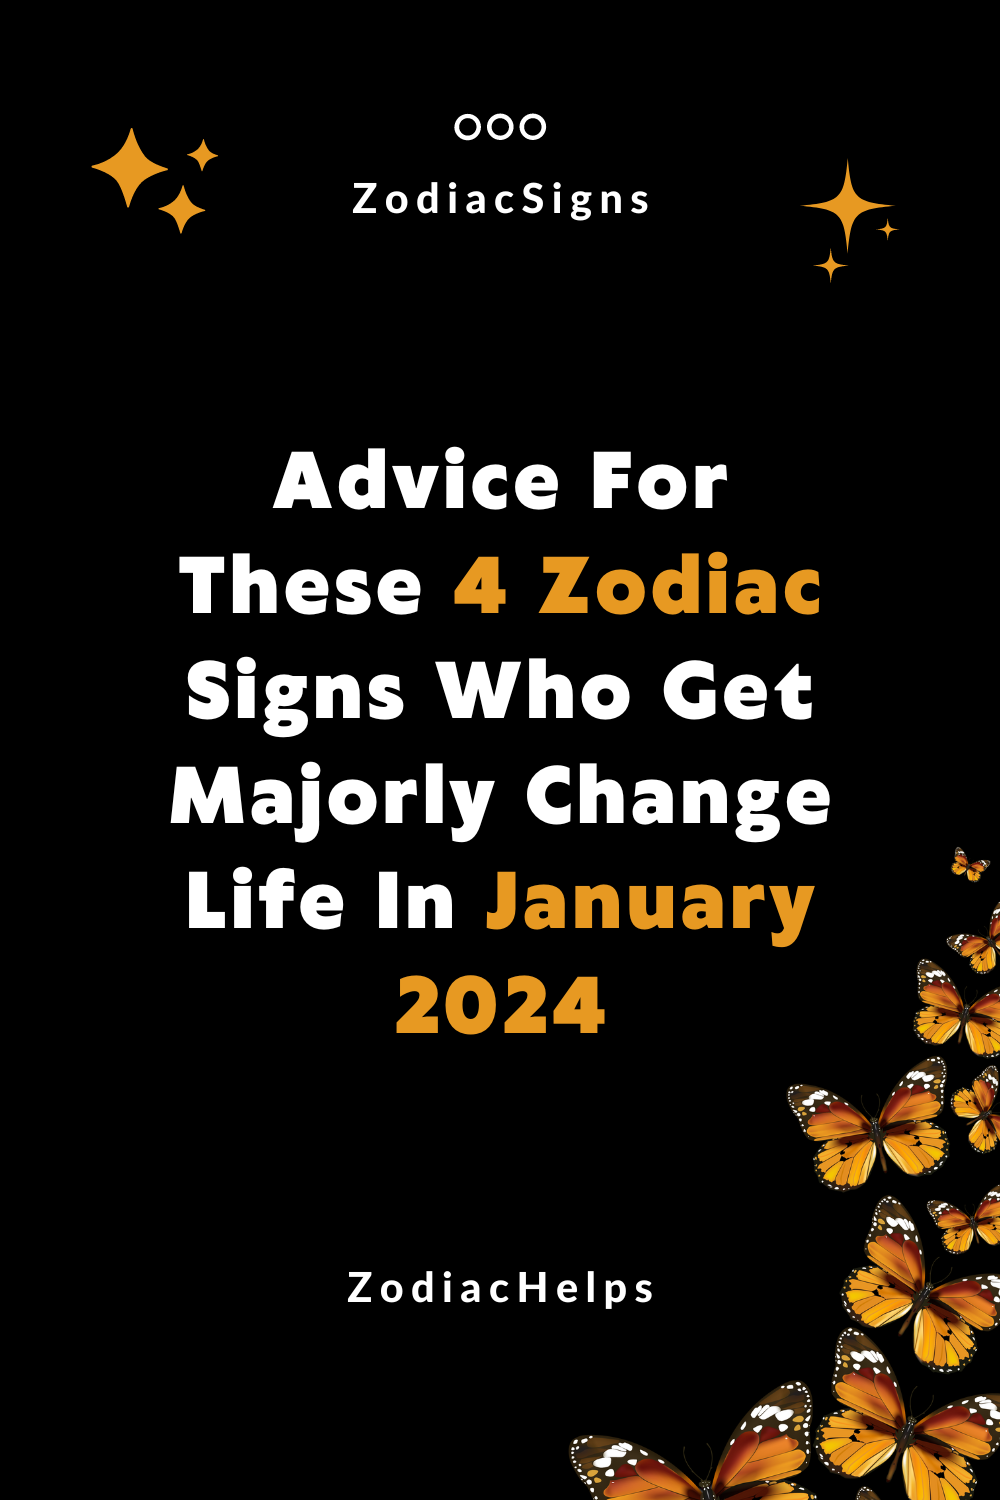 Advice For These 4 Zodiac Signs Who Get Majorly Change Life In January 2024